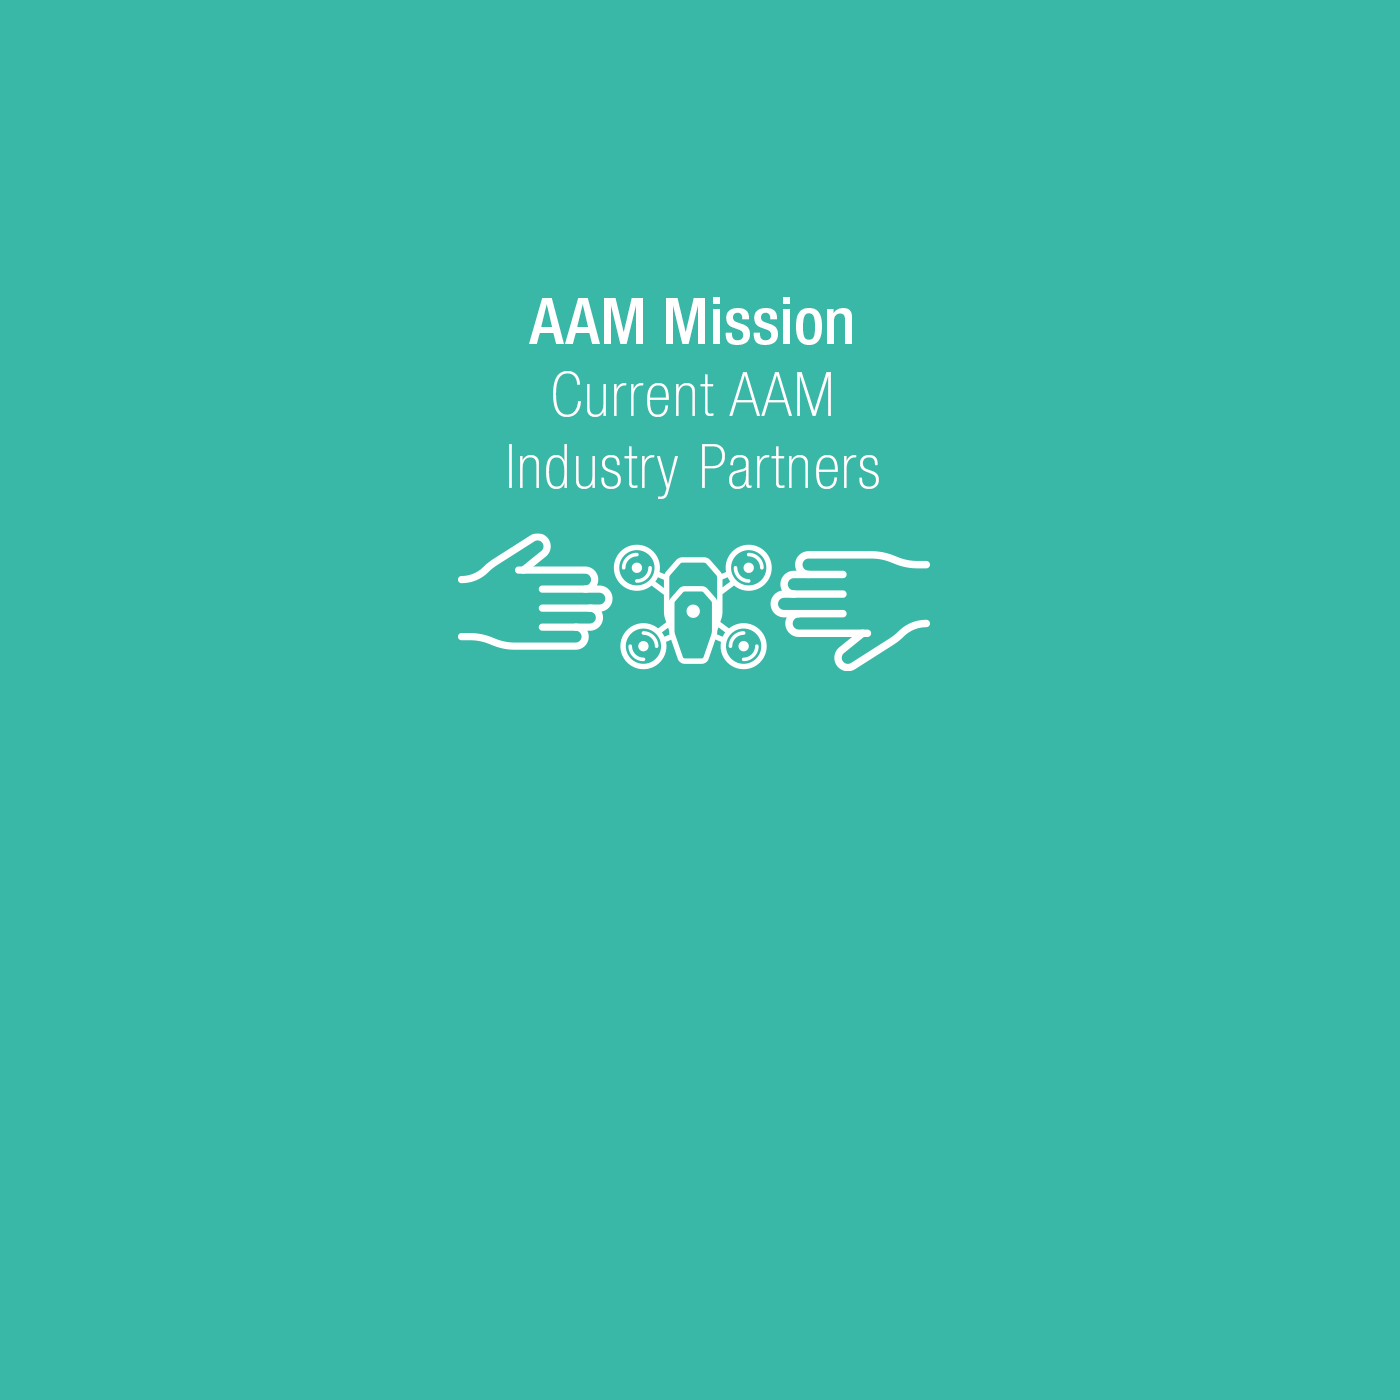 AAM Mission—Current AAM Industry Partners icon with hands and a drone in the middle.